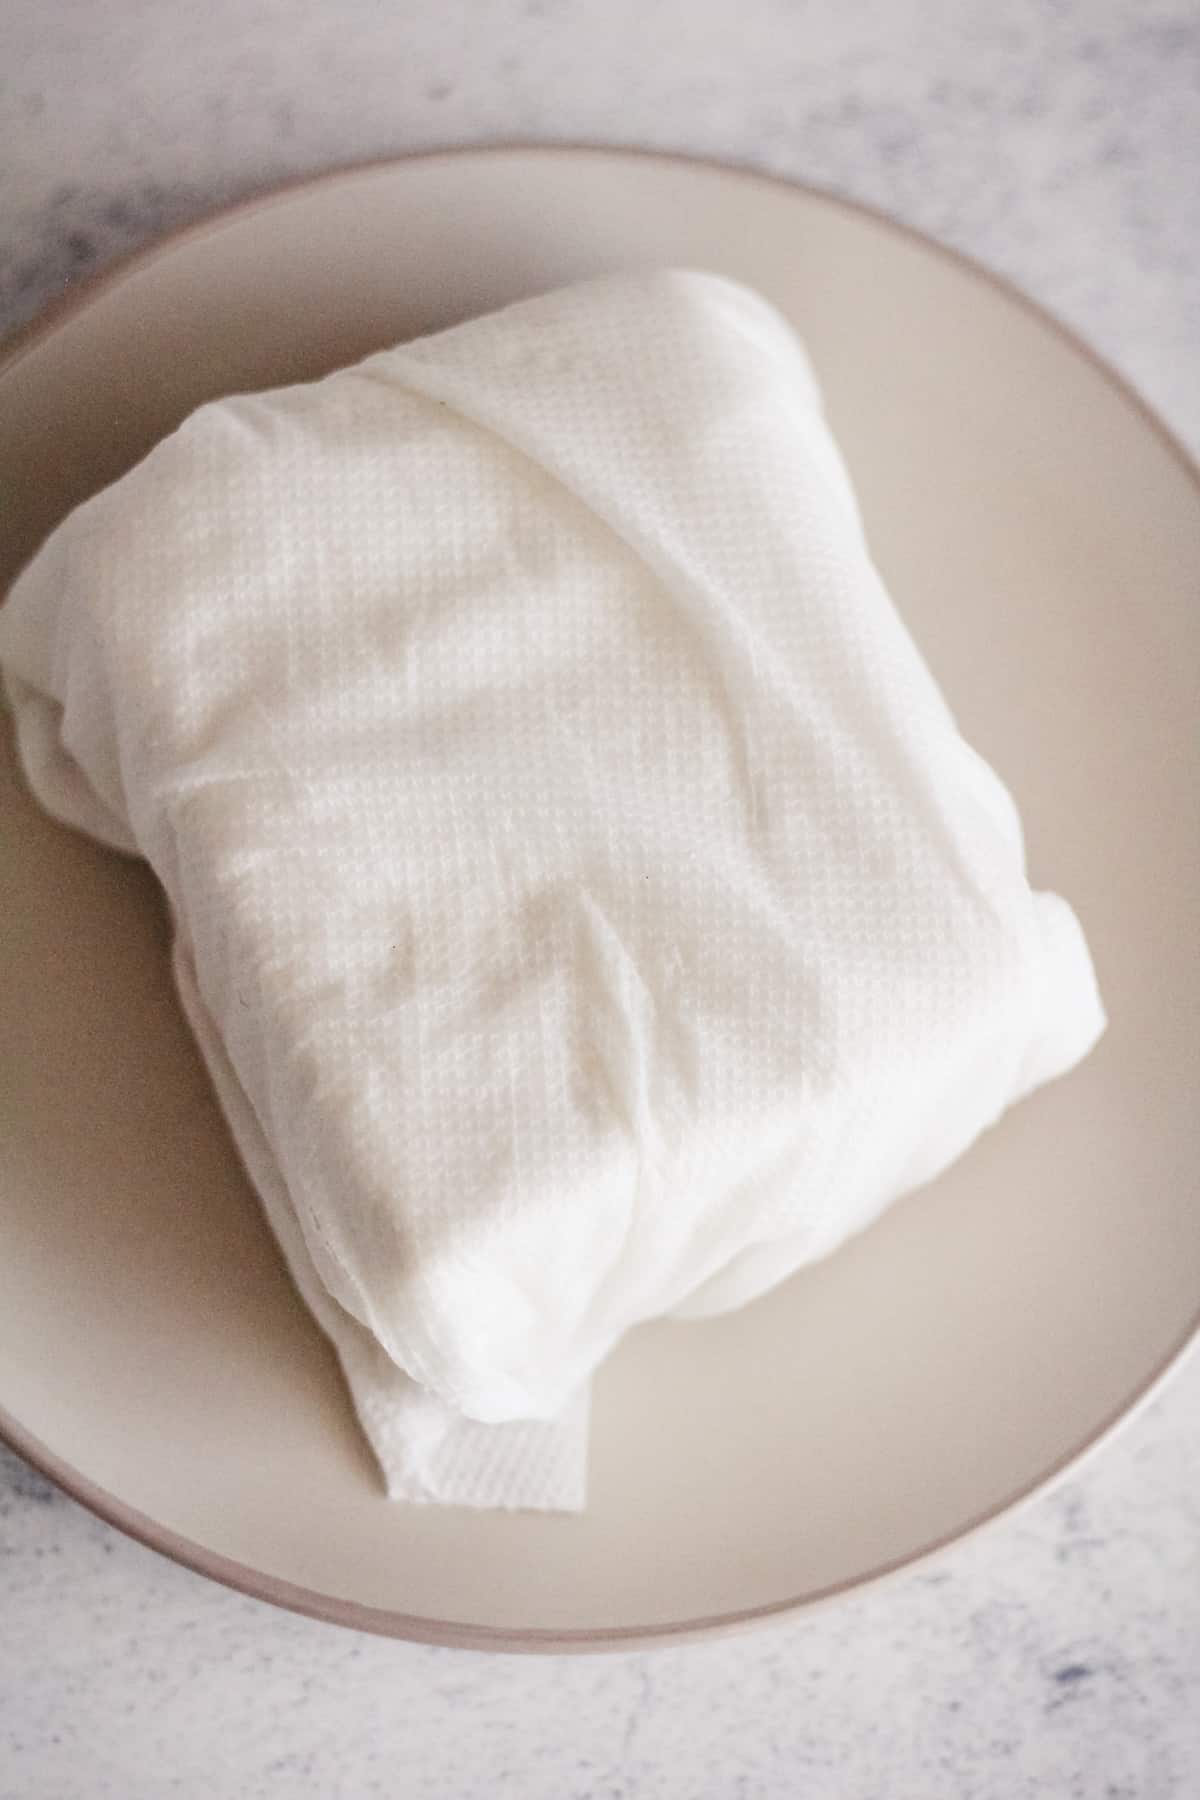 Tofu wrapped in paper towel on a plate.